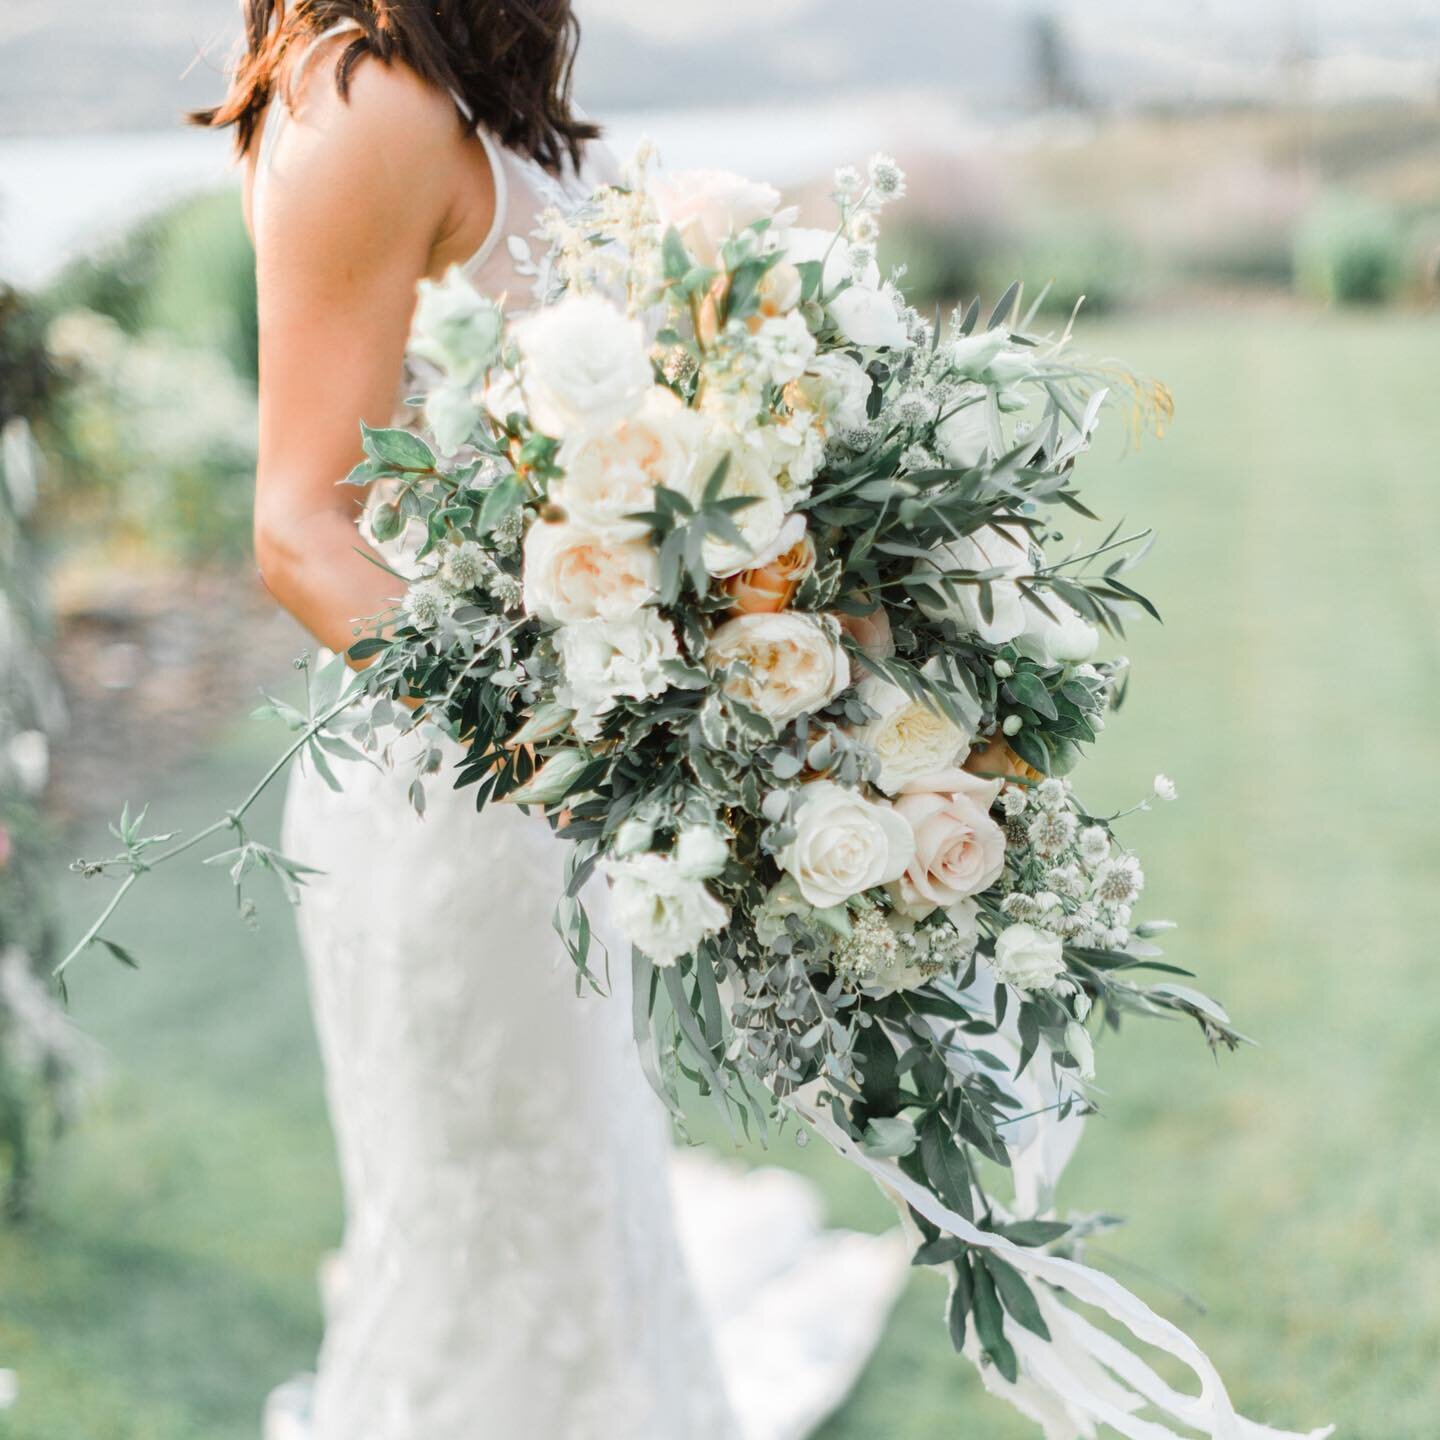 Crushing on the colours and textures of this bouquet.

Photography @blushsky 
Florals @brandymaddisonevents